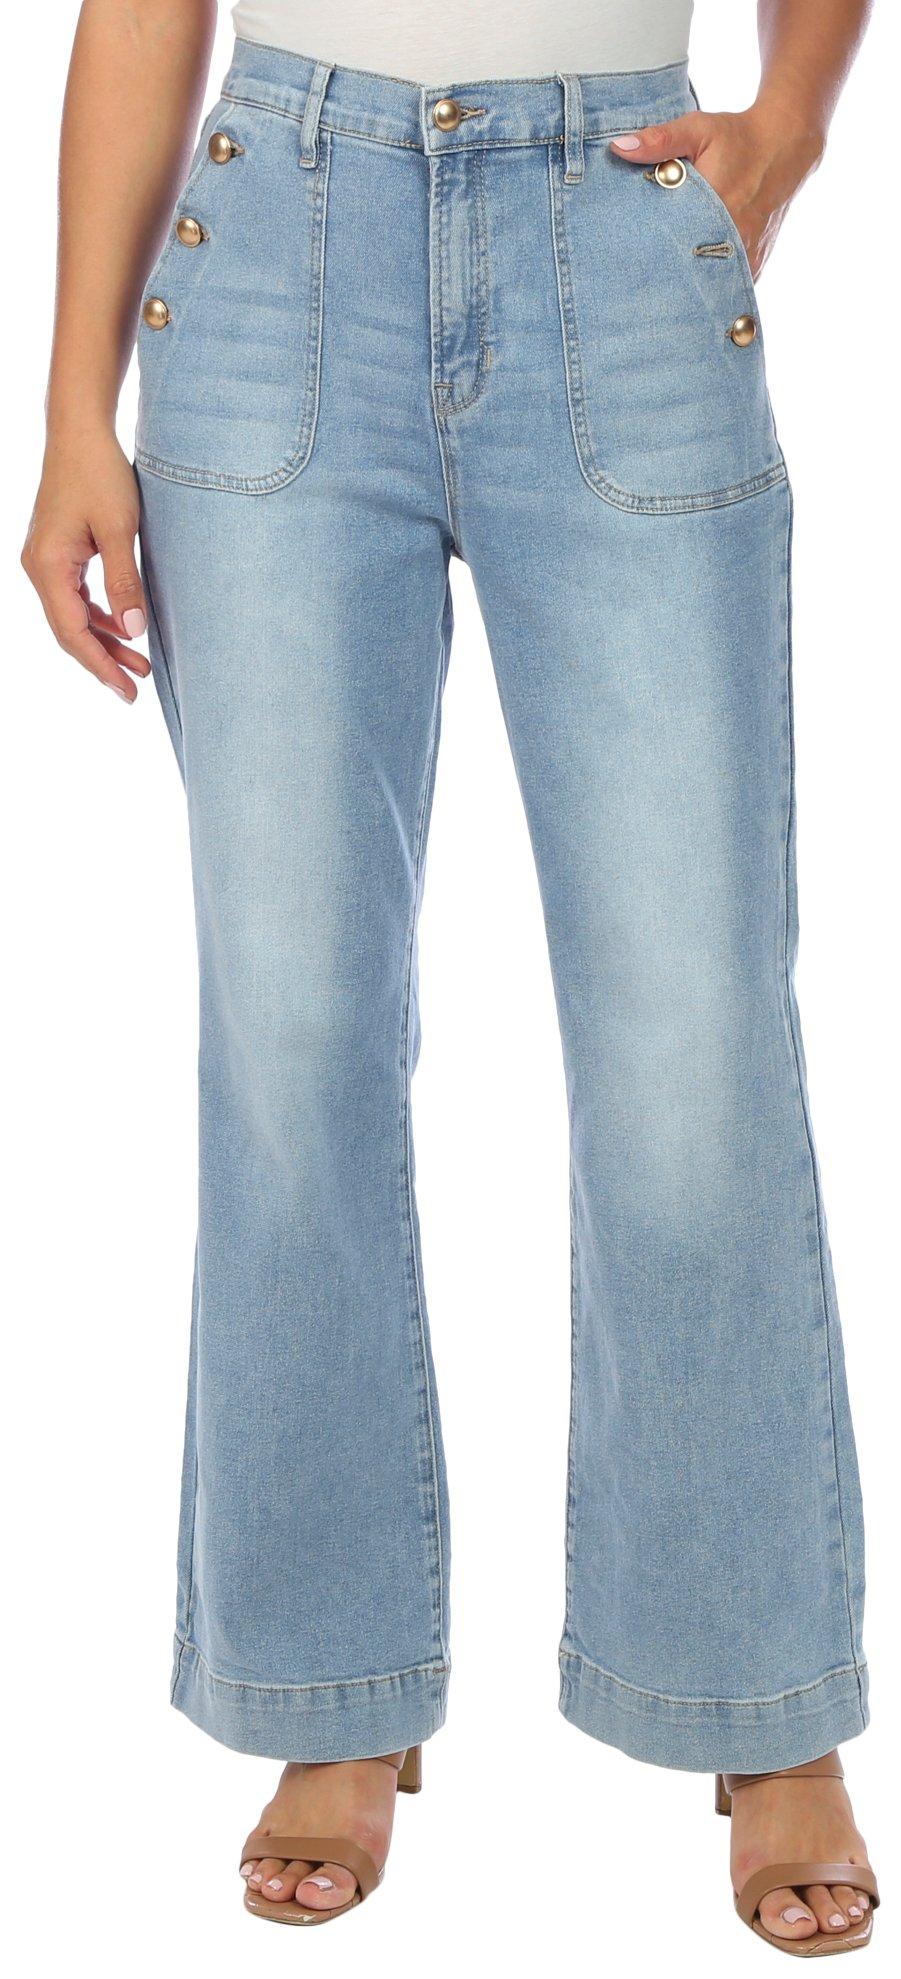 Nicole Miller Womens Perf Fry Boot Cut Jeans